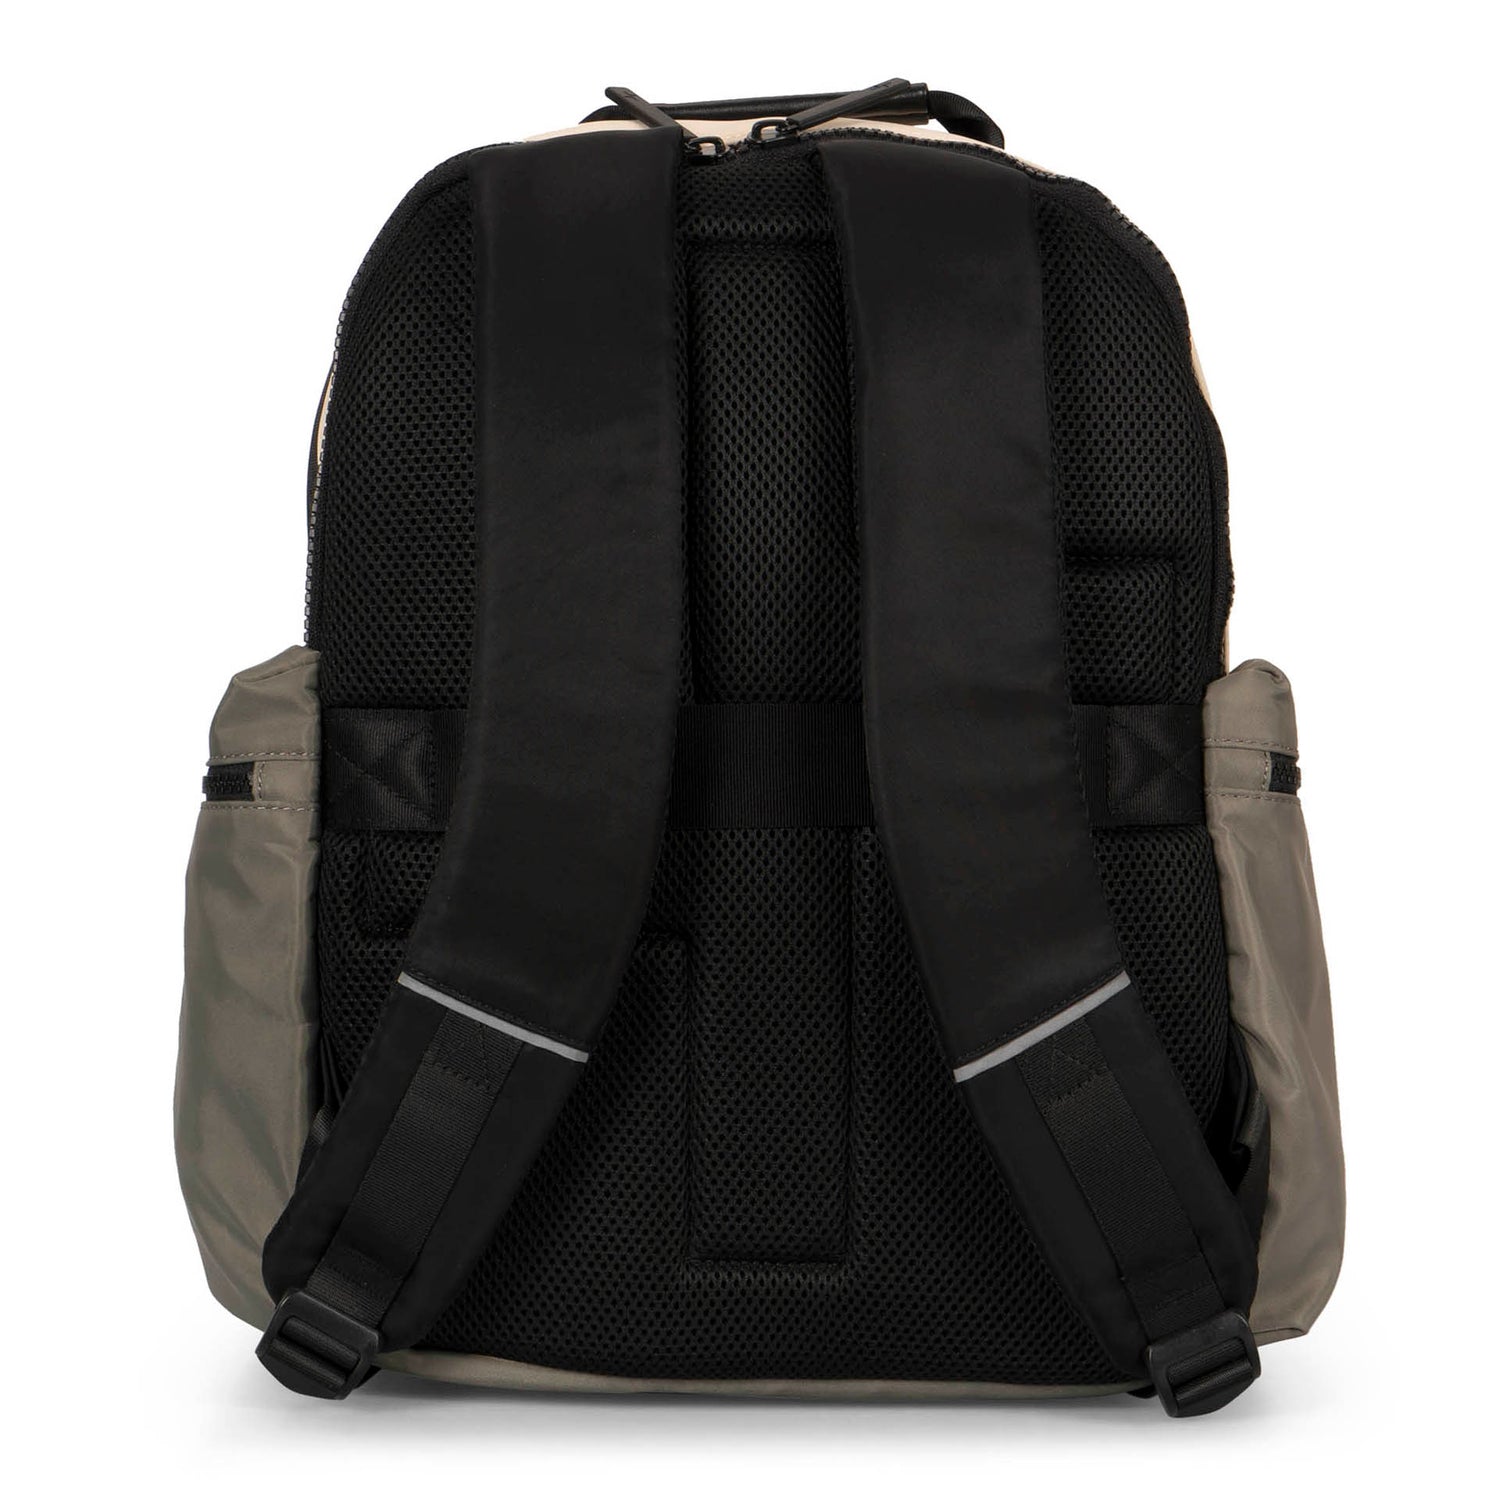 Back side view of a grey-green and beige backpack called Sutton by Tracker on white background, showcasing its padded back panel, top handle, padded straps, and 2 side zipper pockets.